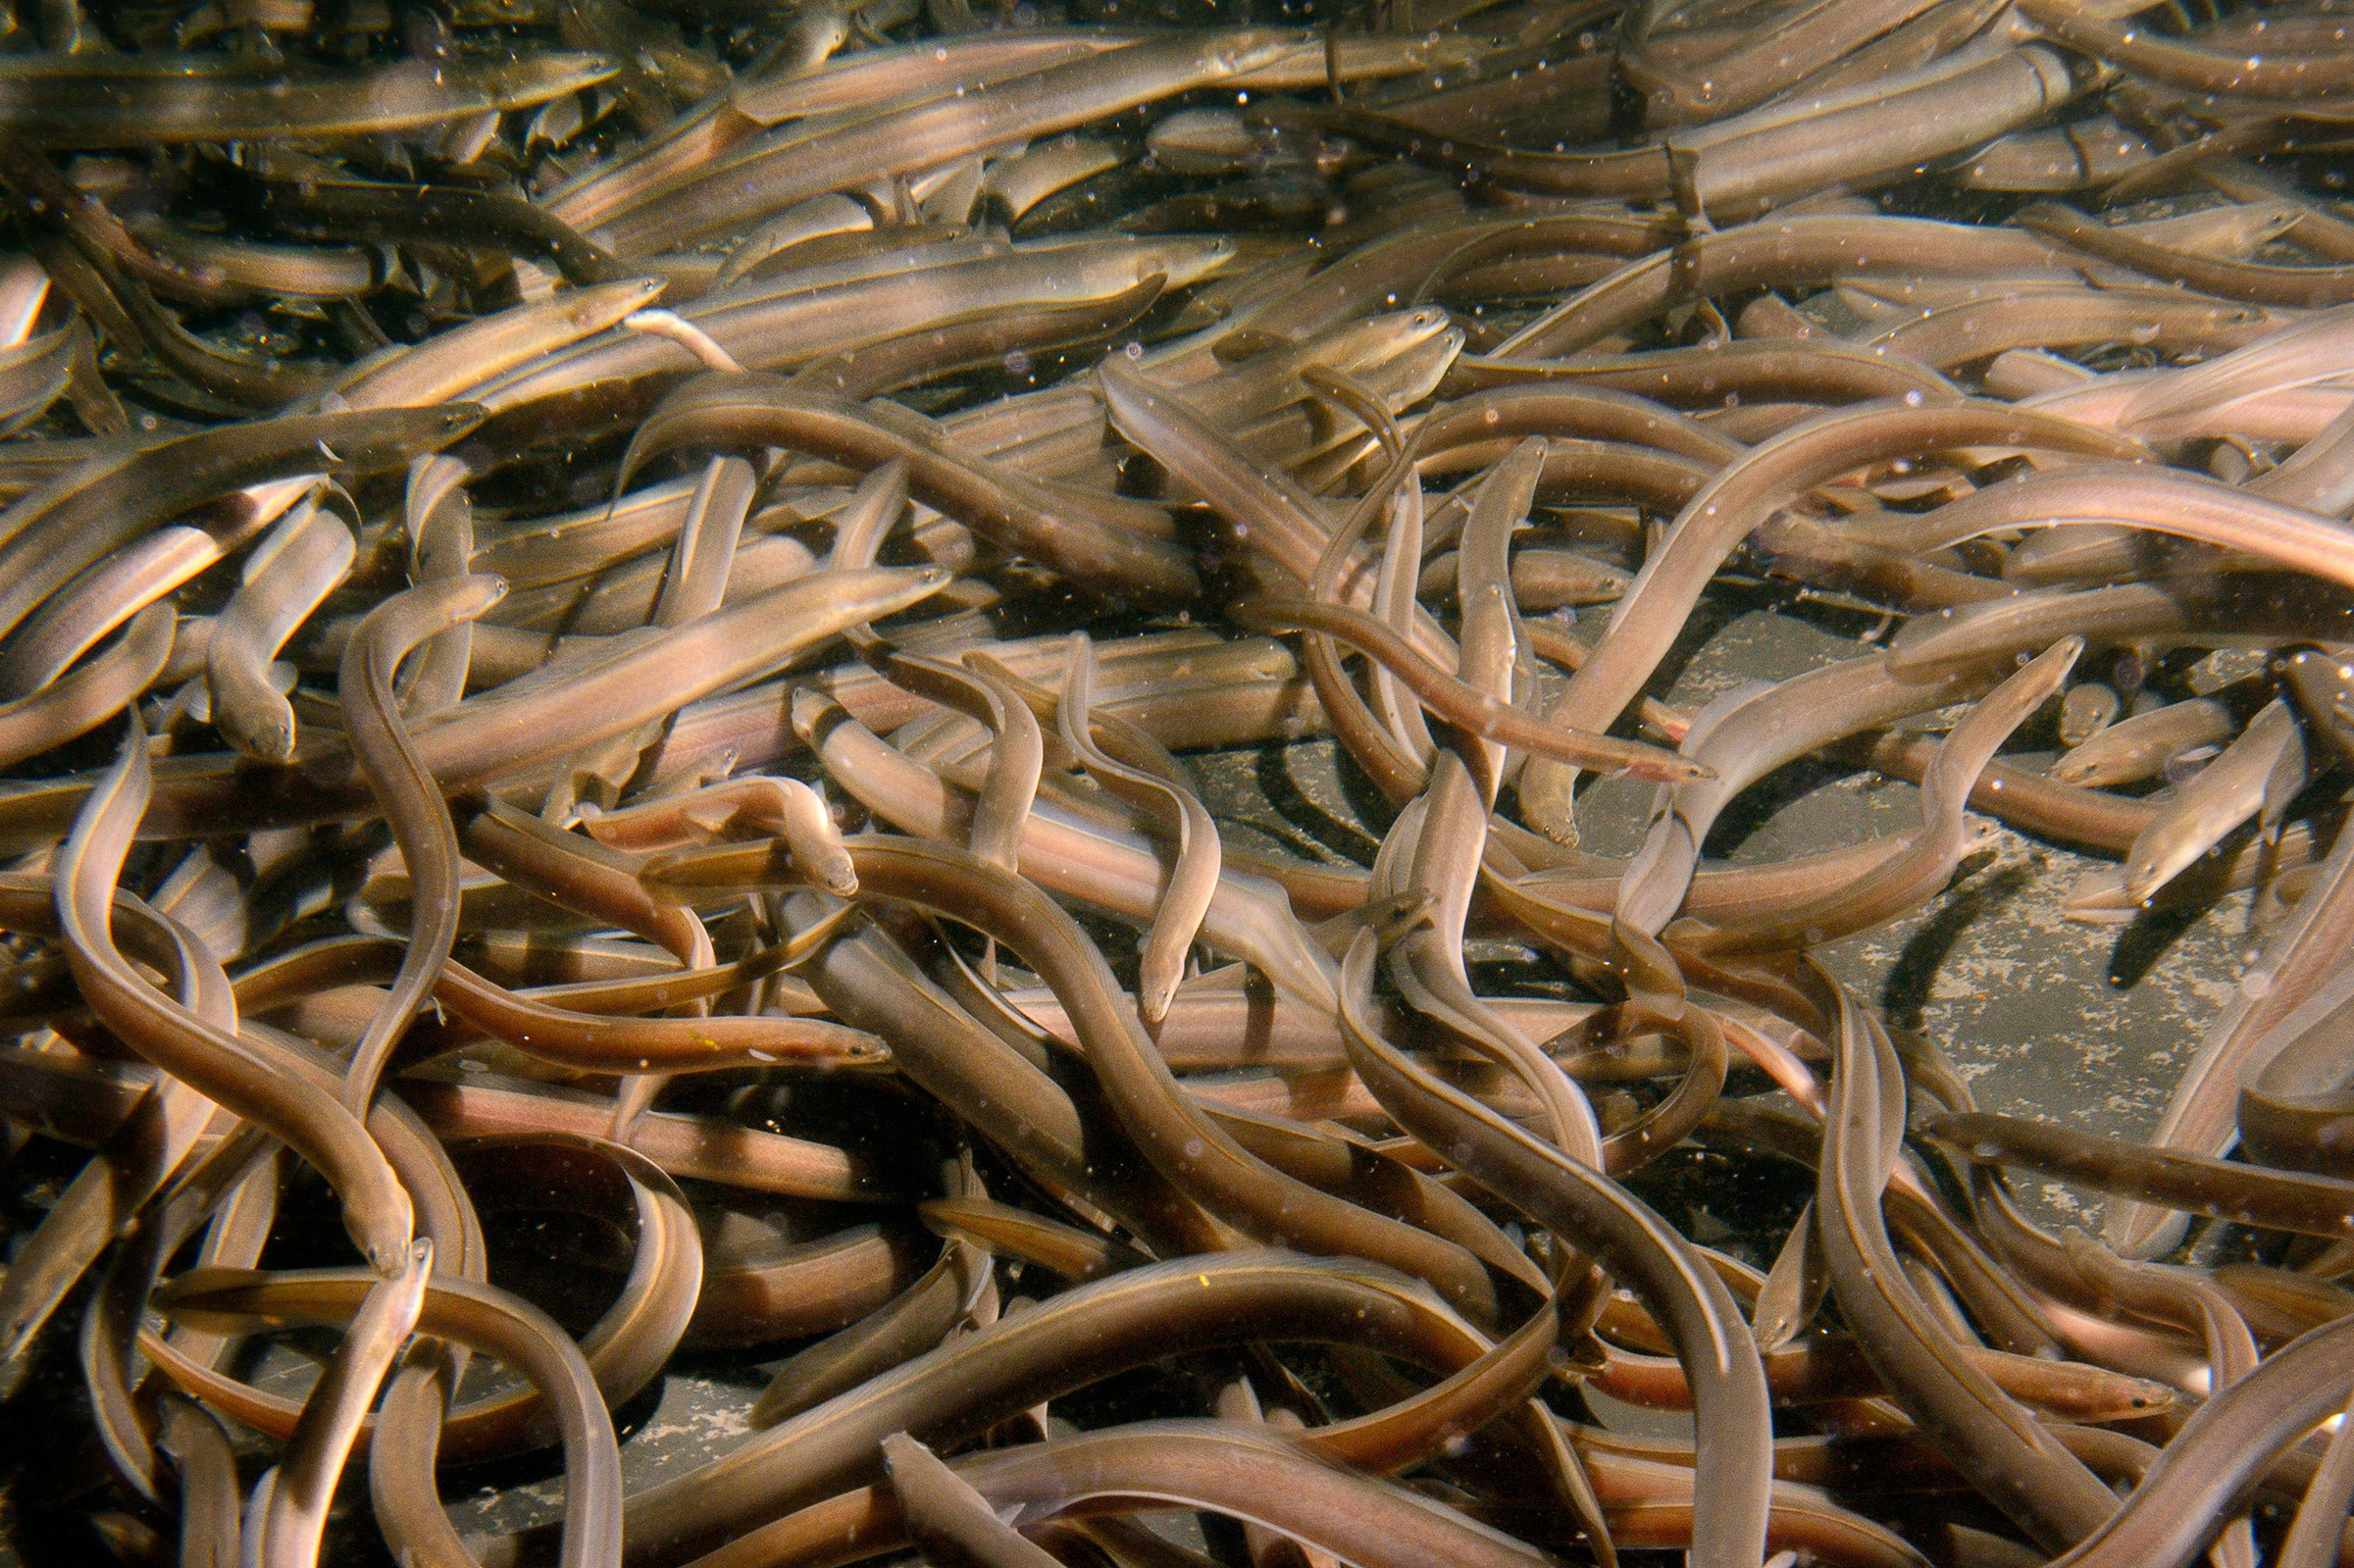 European eel elvers for a reintroduction swimming in a large holding tank in Gloucester, U.K. (Nick Upton—Alamy)